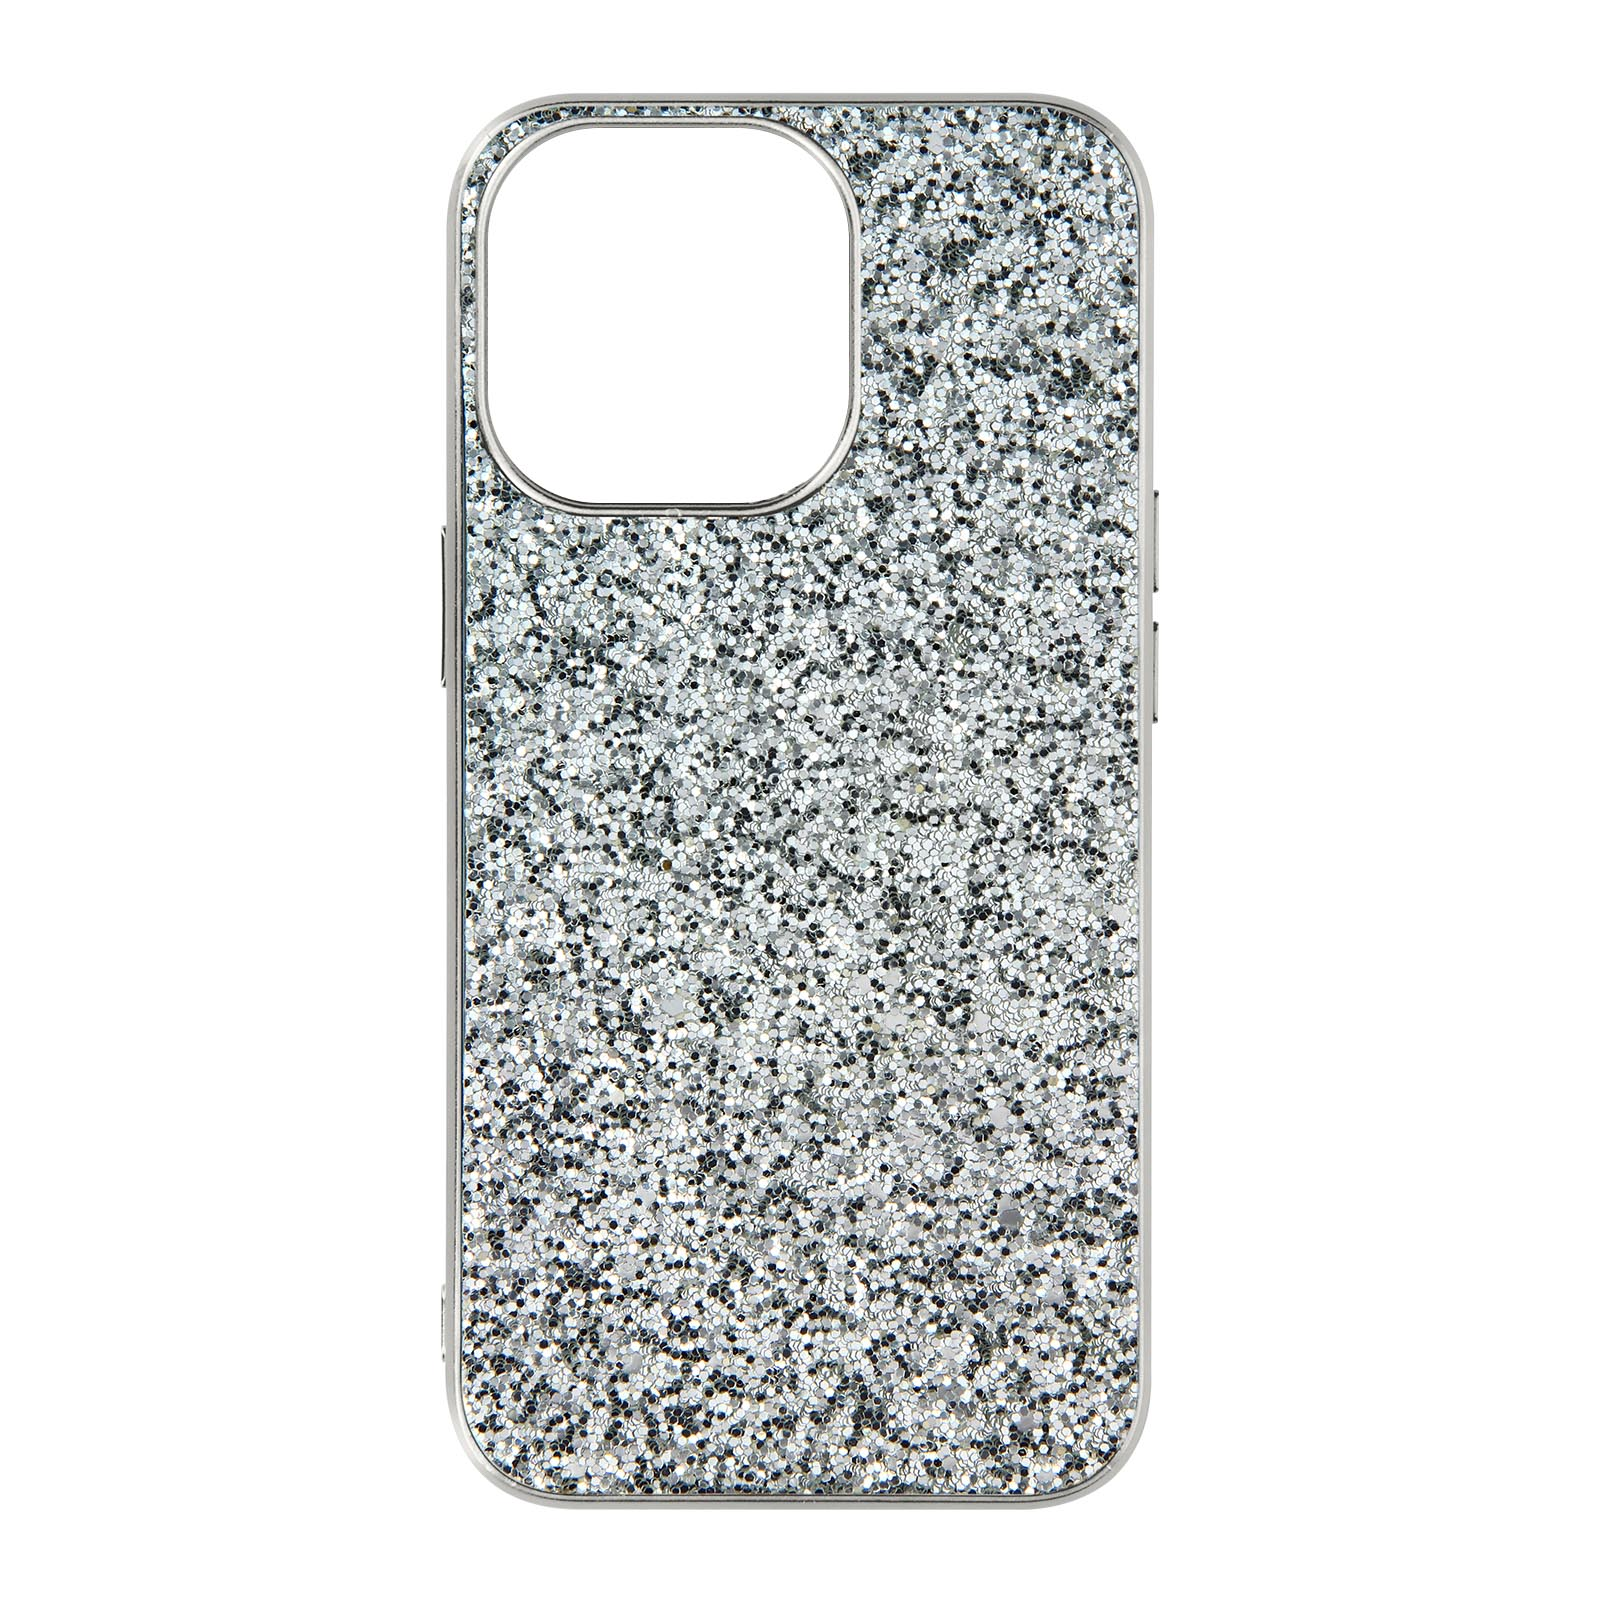 iPhone Pro Backcover, Max, Powder Silber 13 AVIZAR Series, Apple,